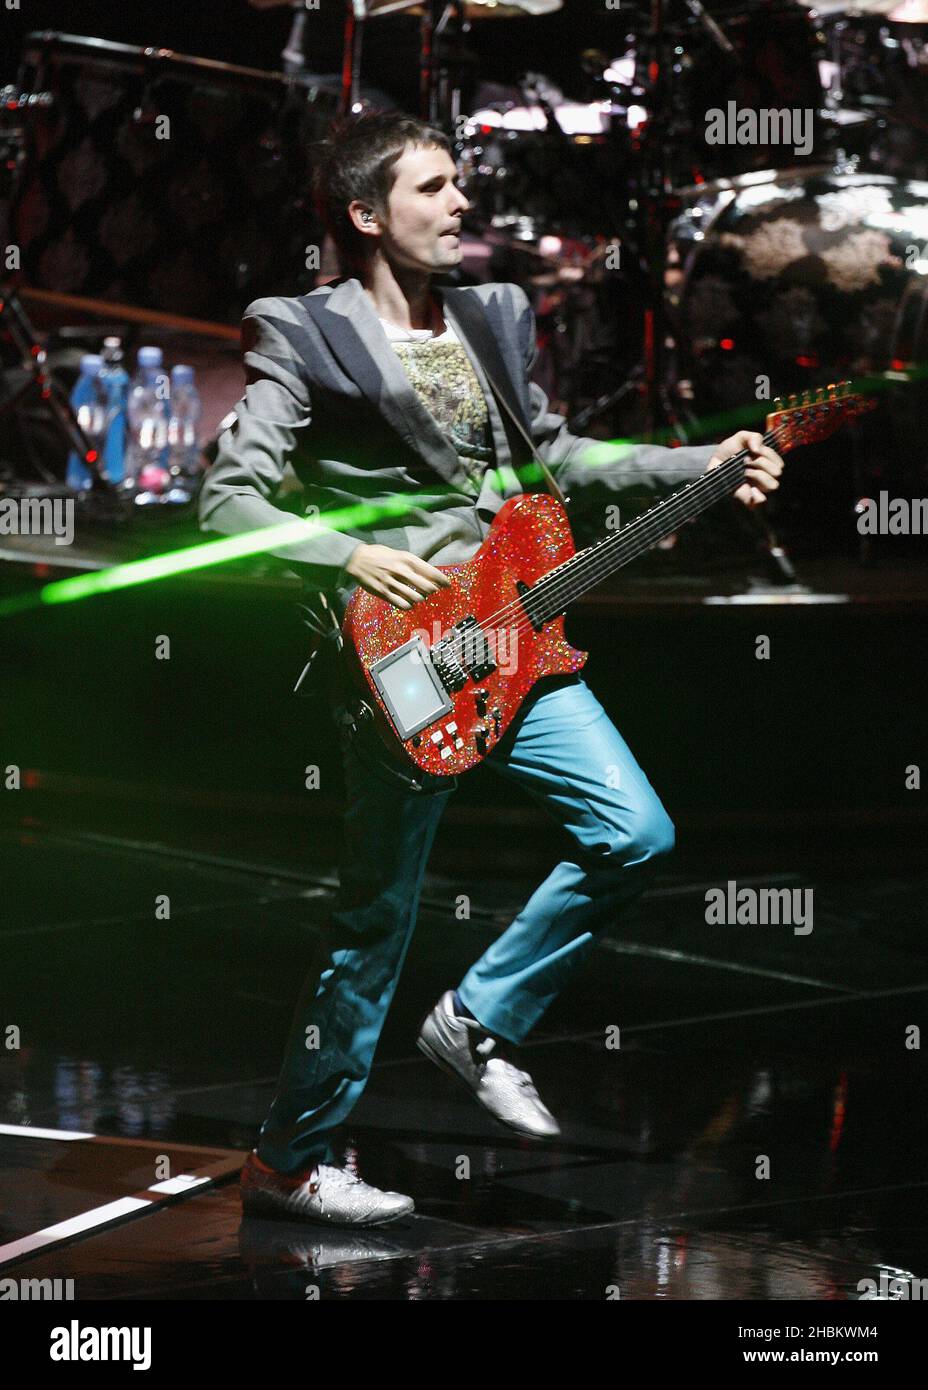 Matthew Bellamy of Muse performs on stage at the 02 Arena, London Stock Photo